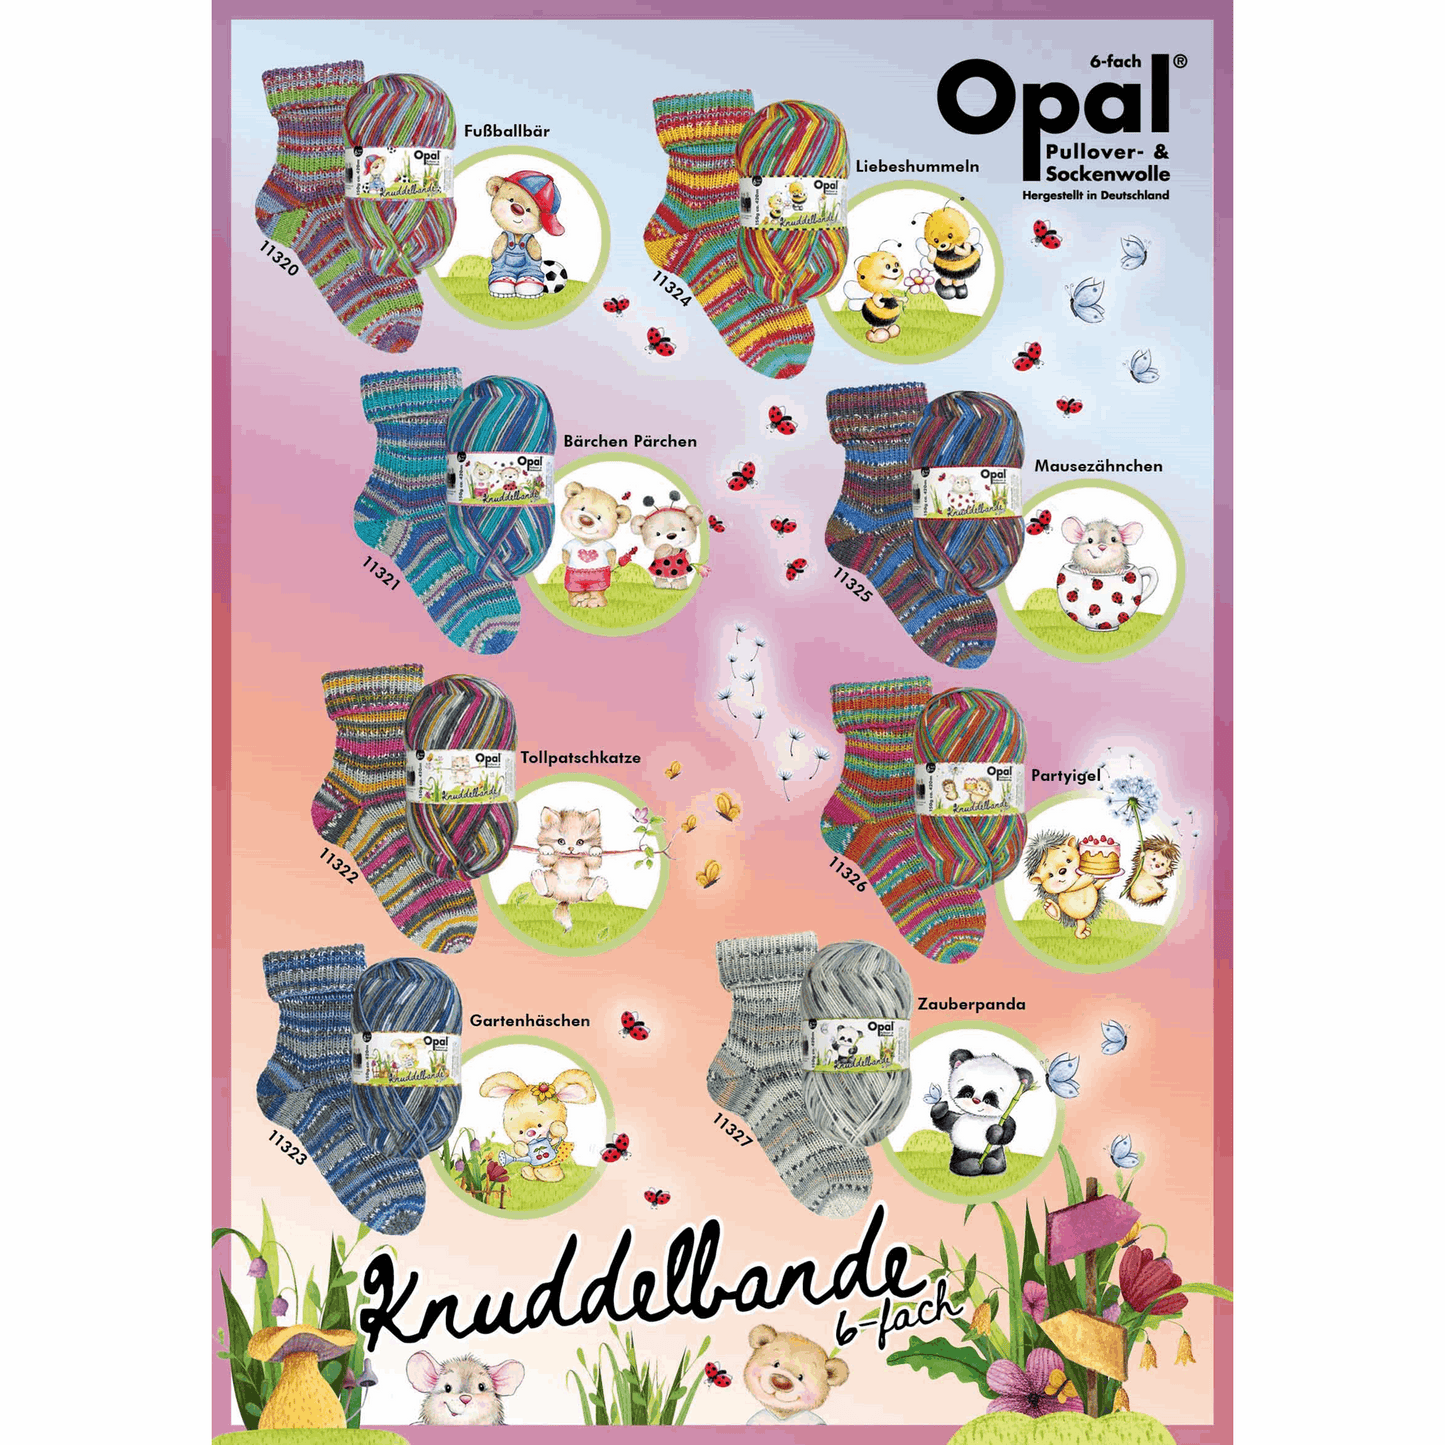 Opal cuddly ties 6-fold 150g, color party hedgehog 11326